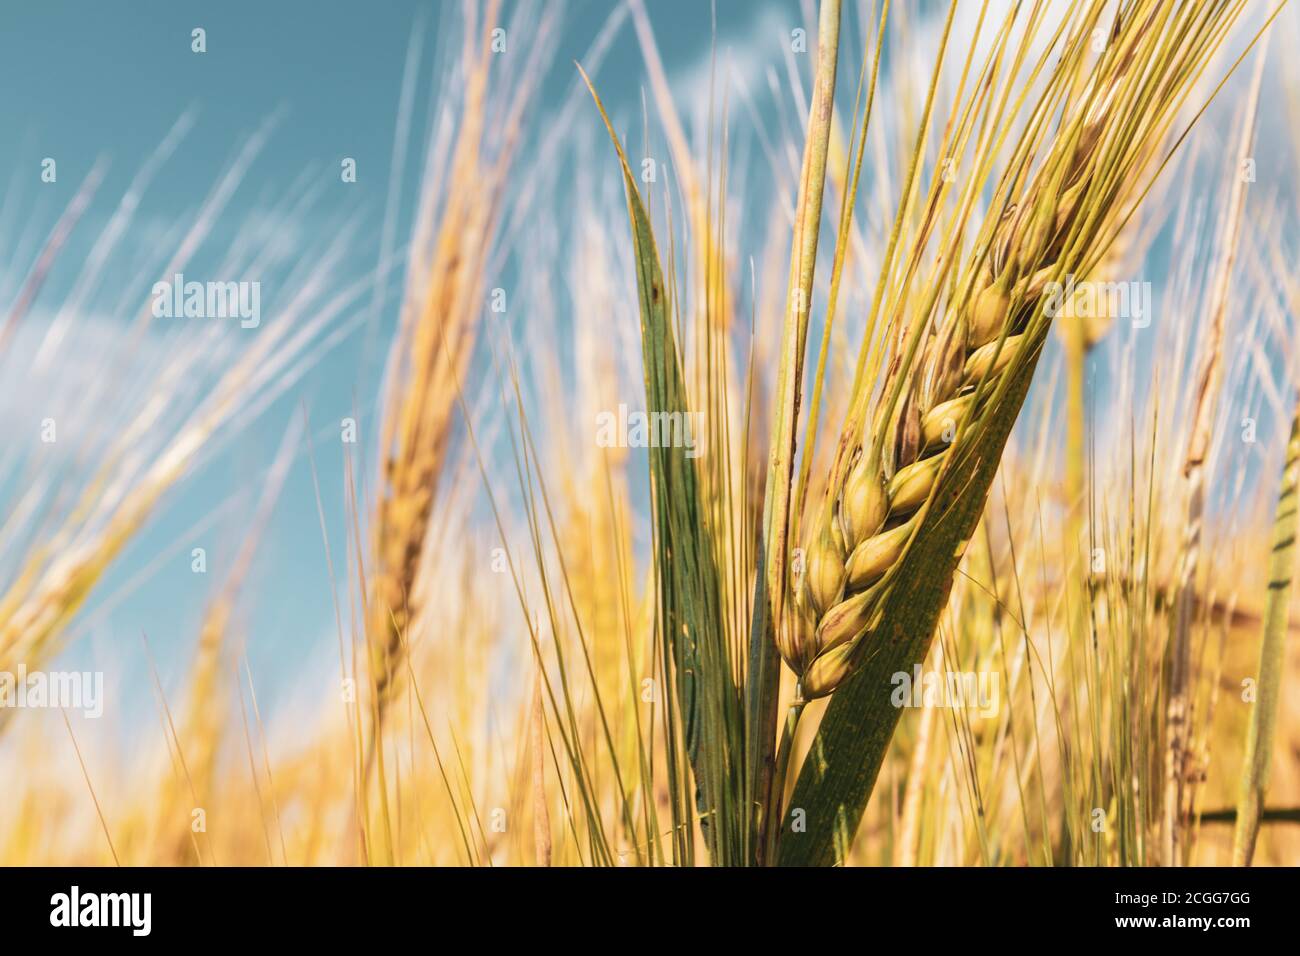 Sunny gold wheat straw close-up with blurred field background. Agriculture gathering in crops summer time macro color graded Stock Photo